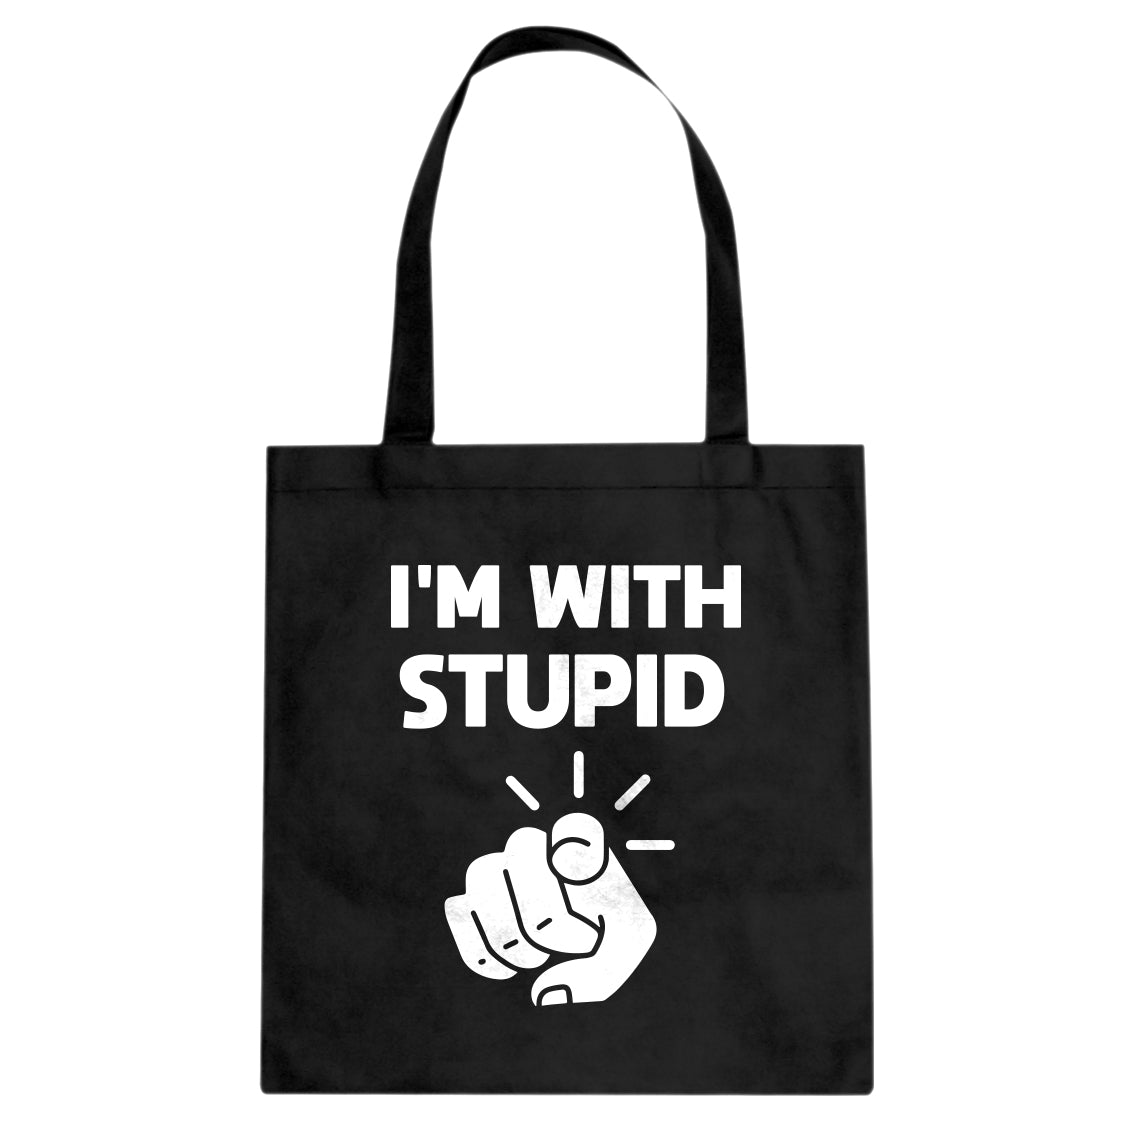 I'm With Stupid You Cotton Canvas Tote Bag